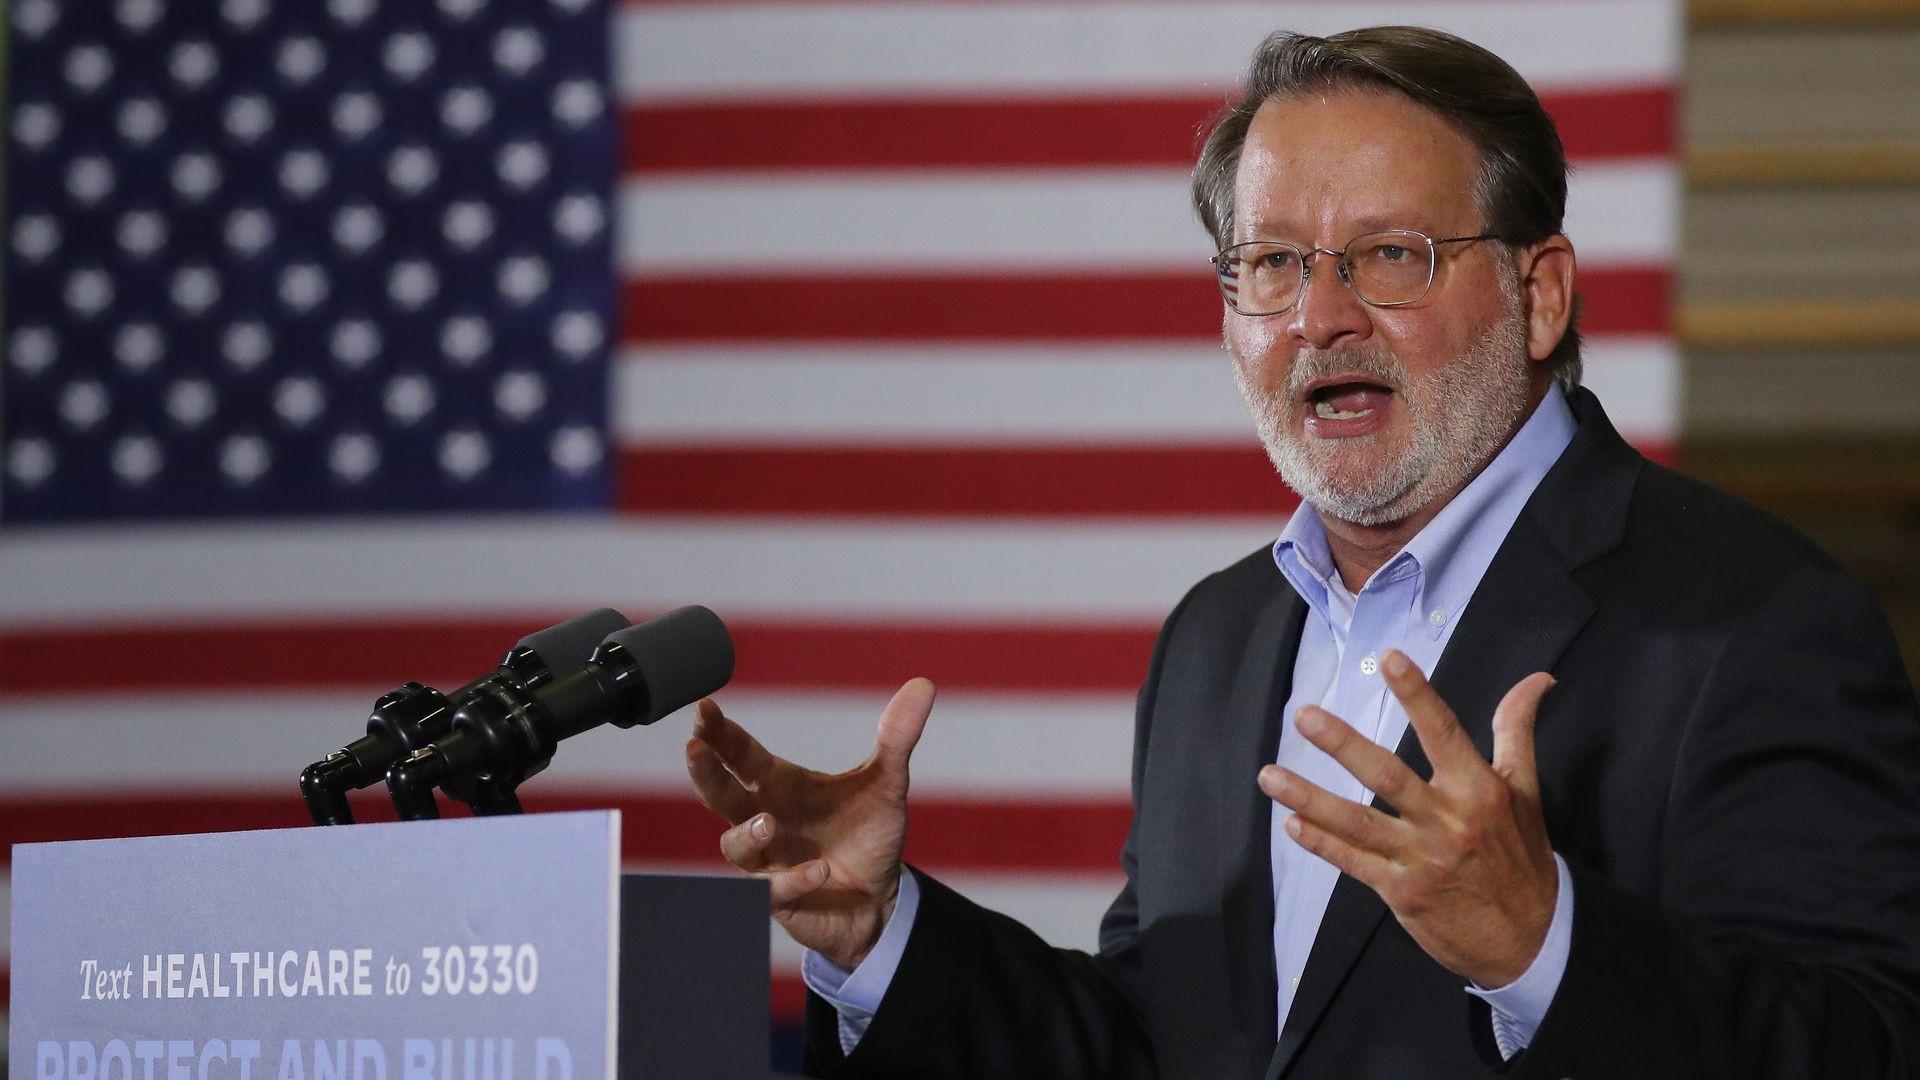 Sen. Gary Peters is seen speaking at a campaign event.